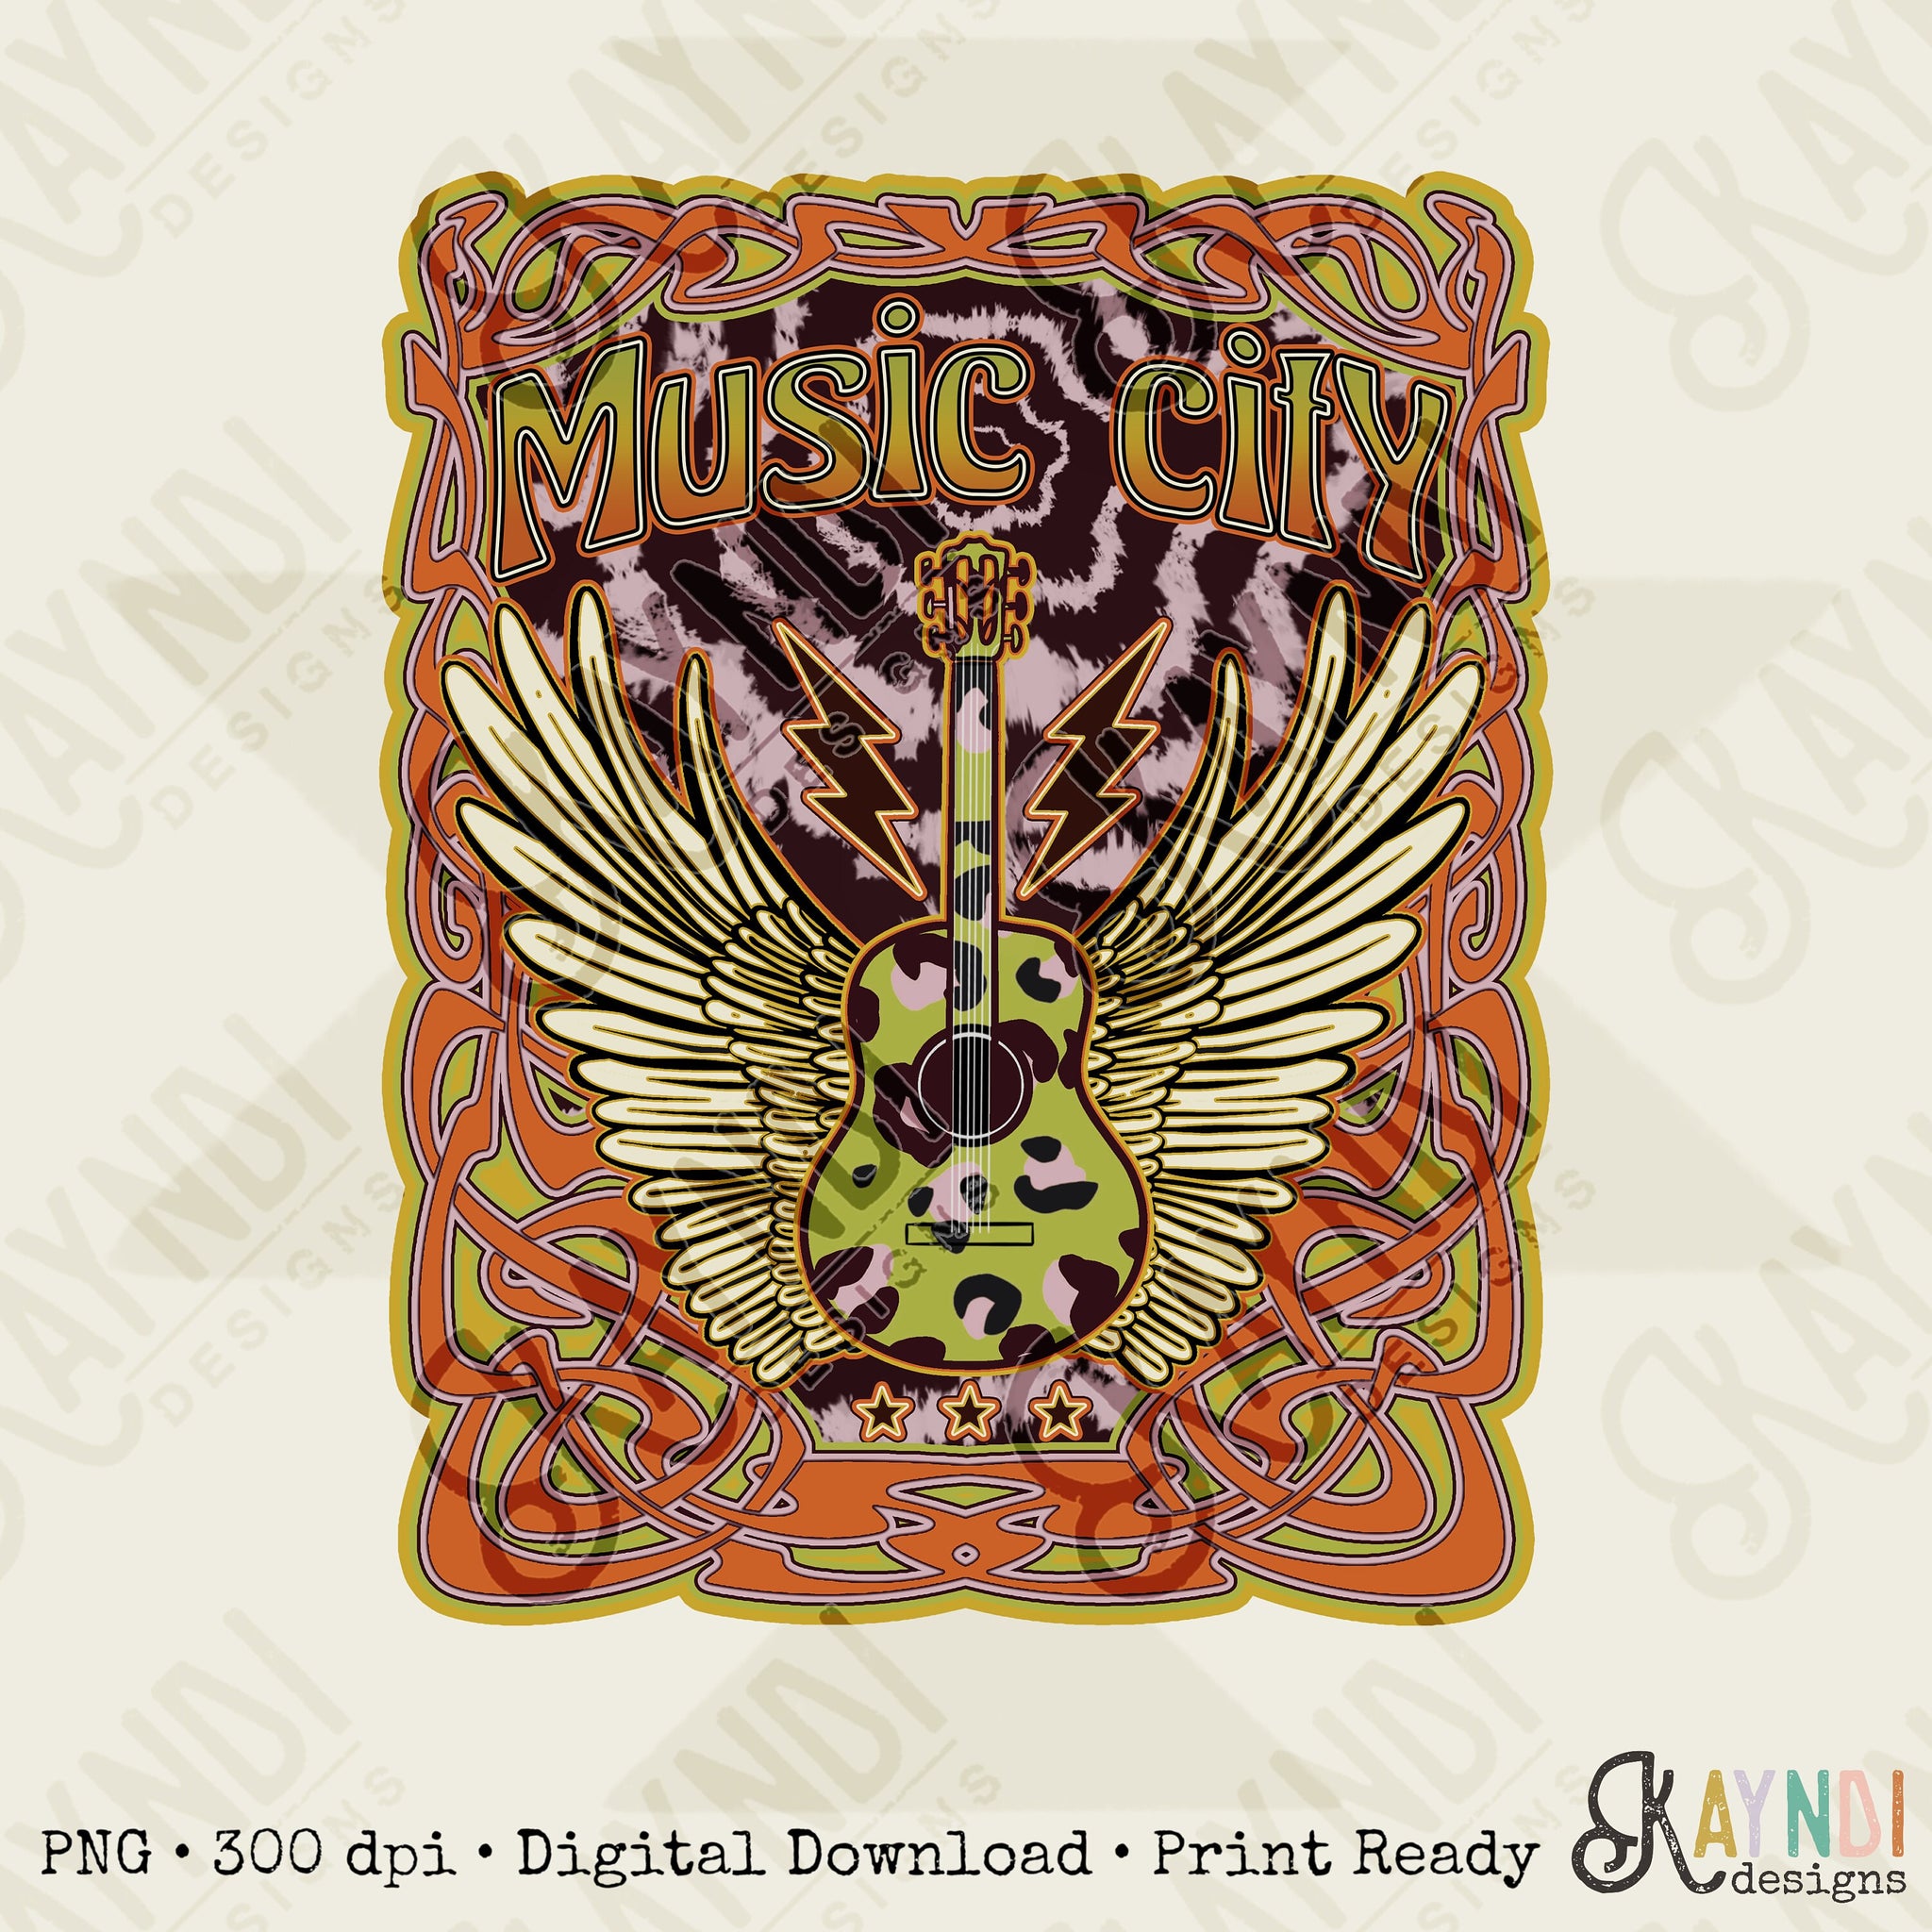 Music City Dark Sublimation Design PNG Digital Download Printable Retro Groovy Country Retro Band Guitar Wings Leopard 70s Seventies